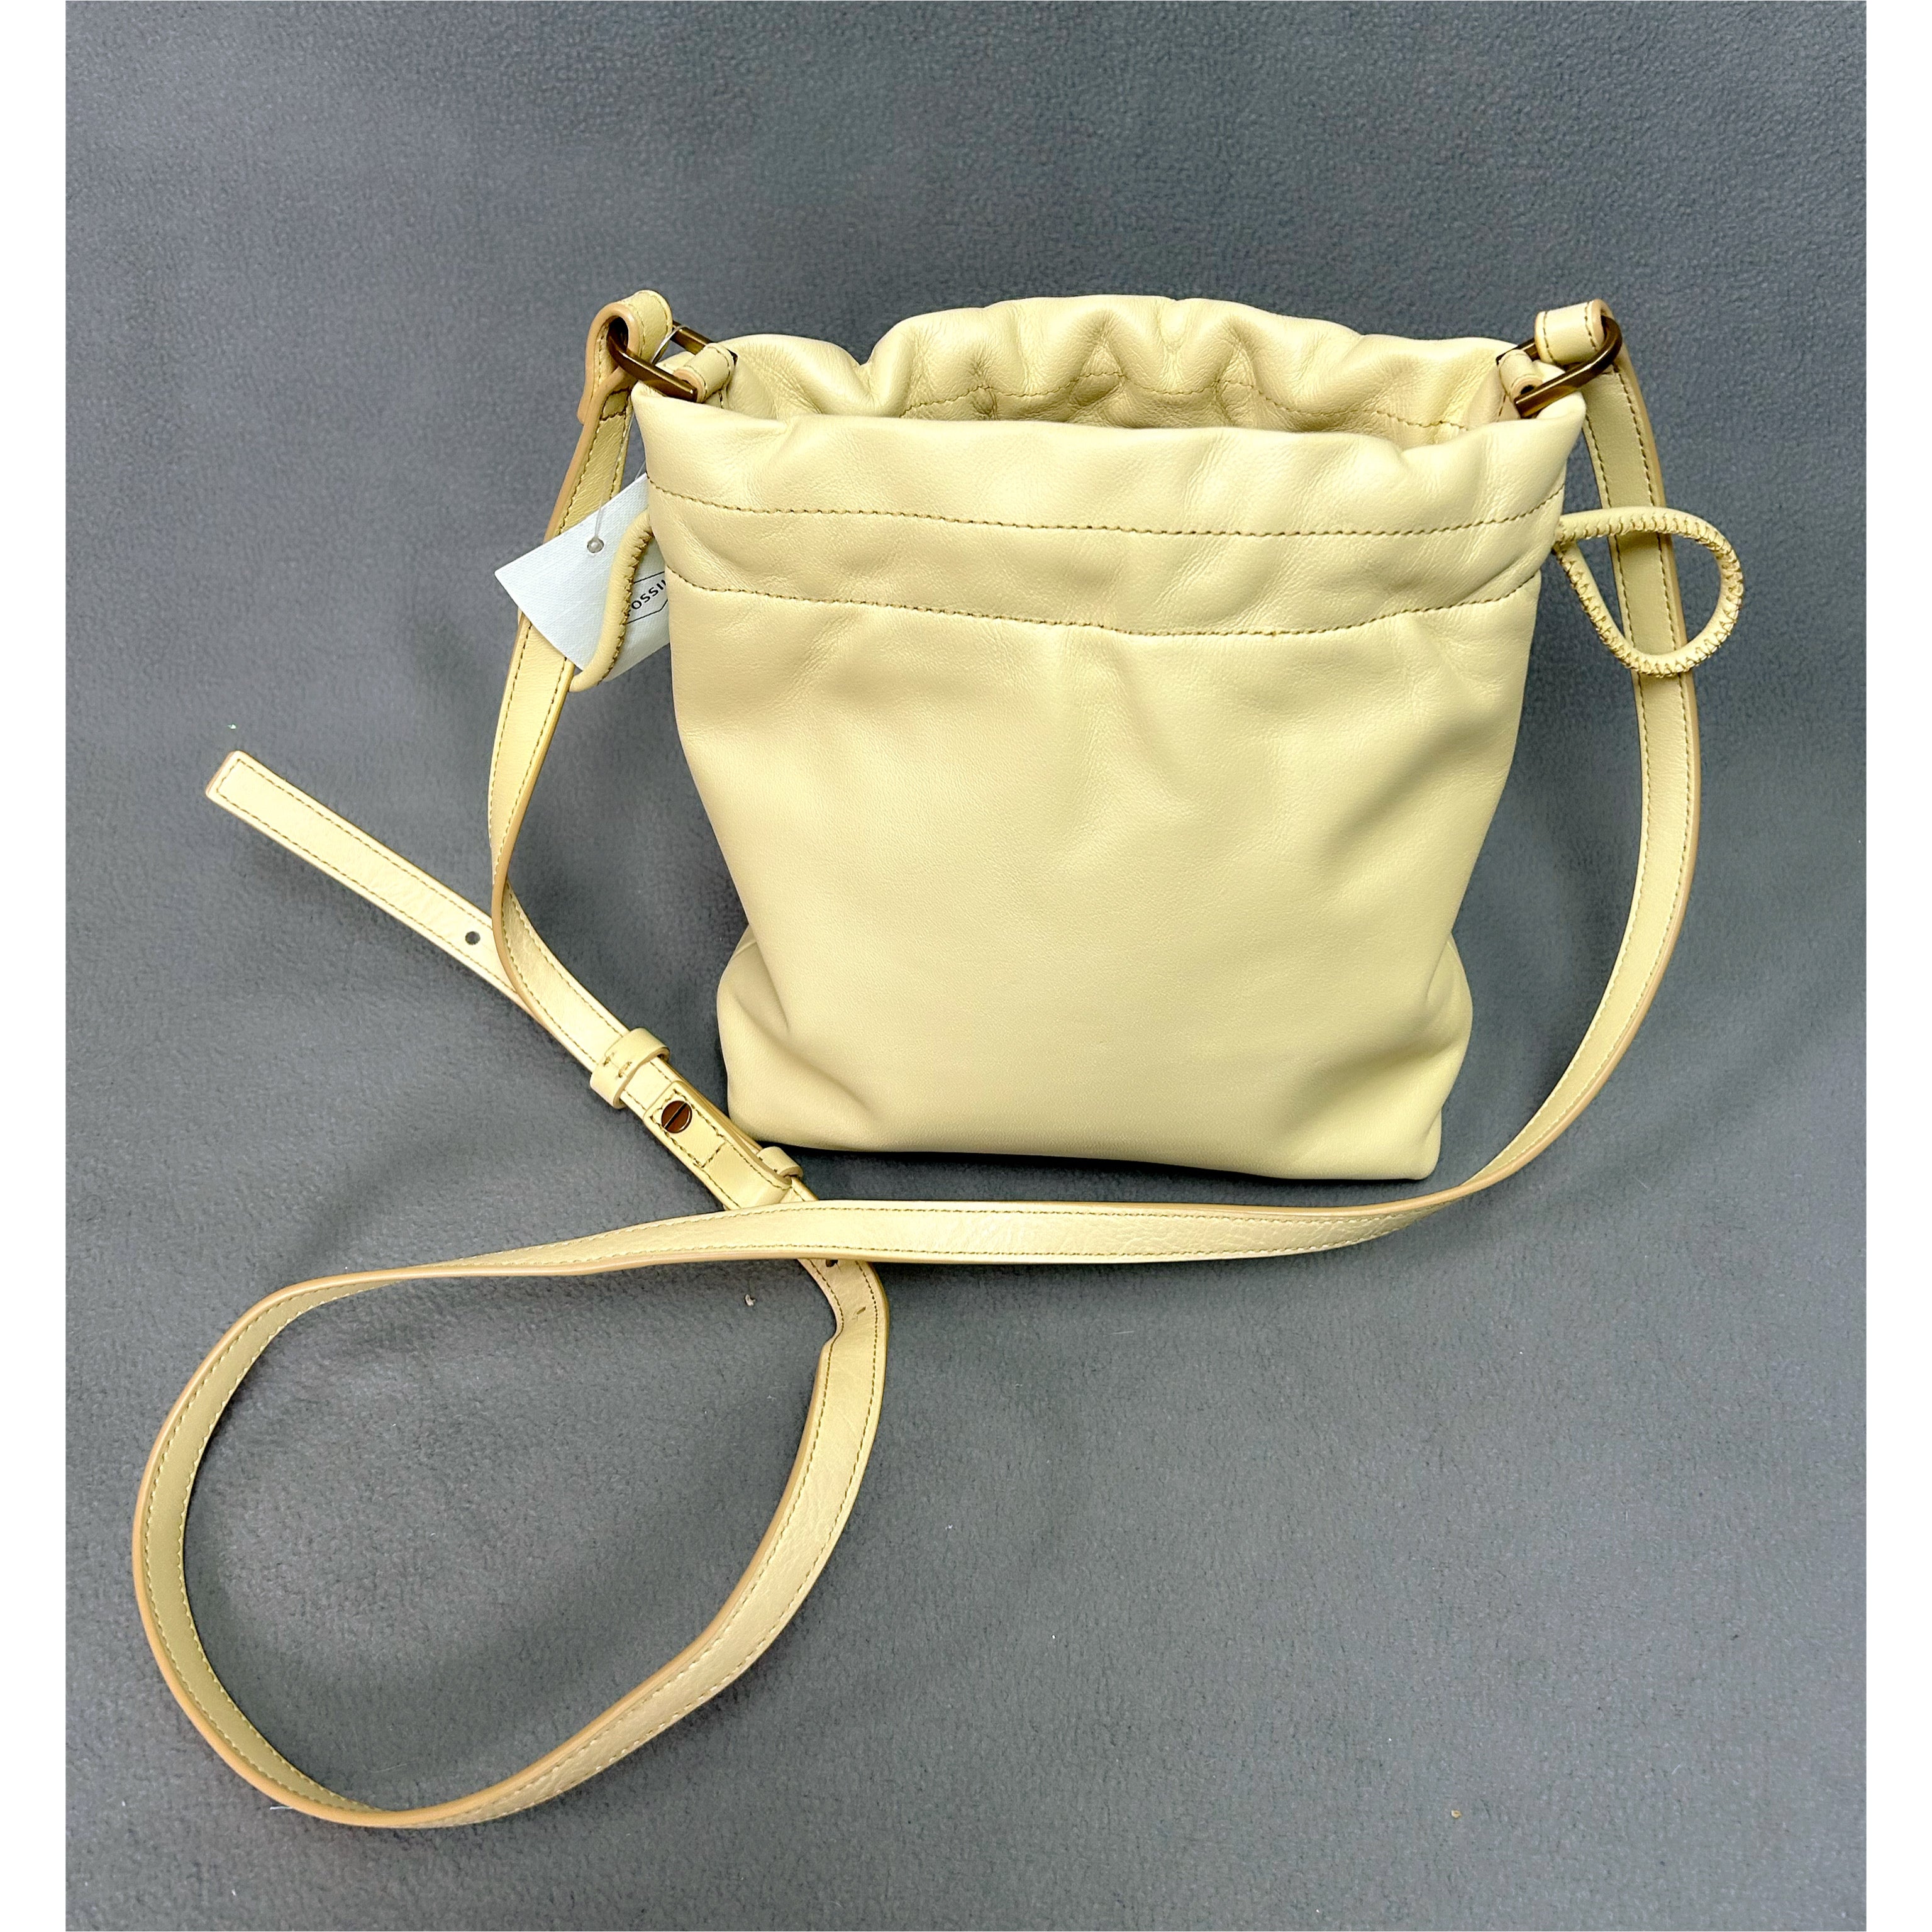 Fossil pale yellow leather bag, NEW WITH TAGS!